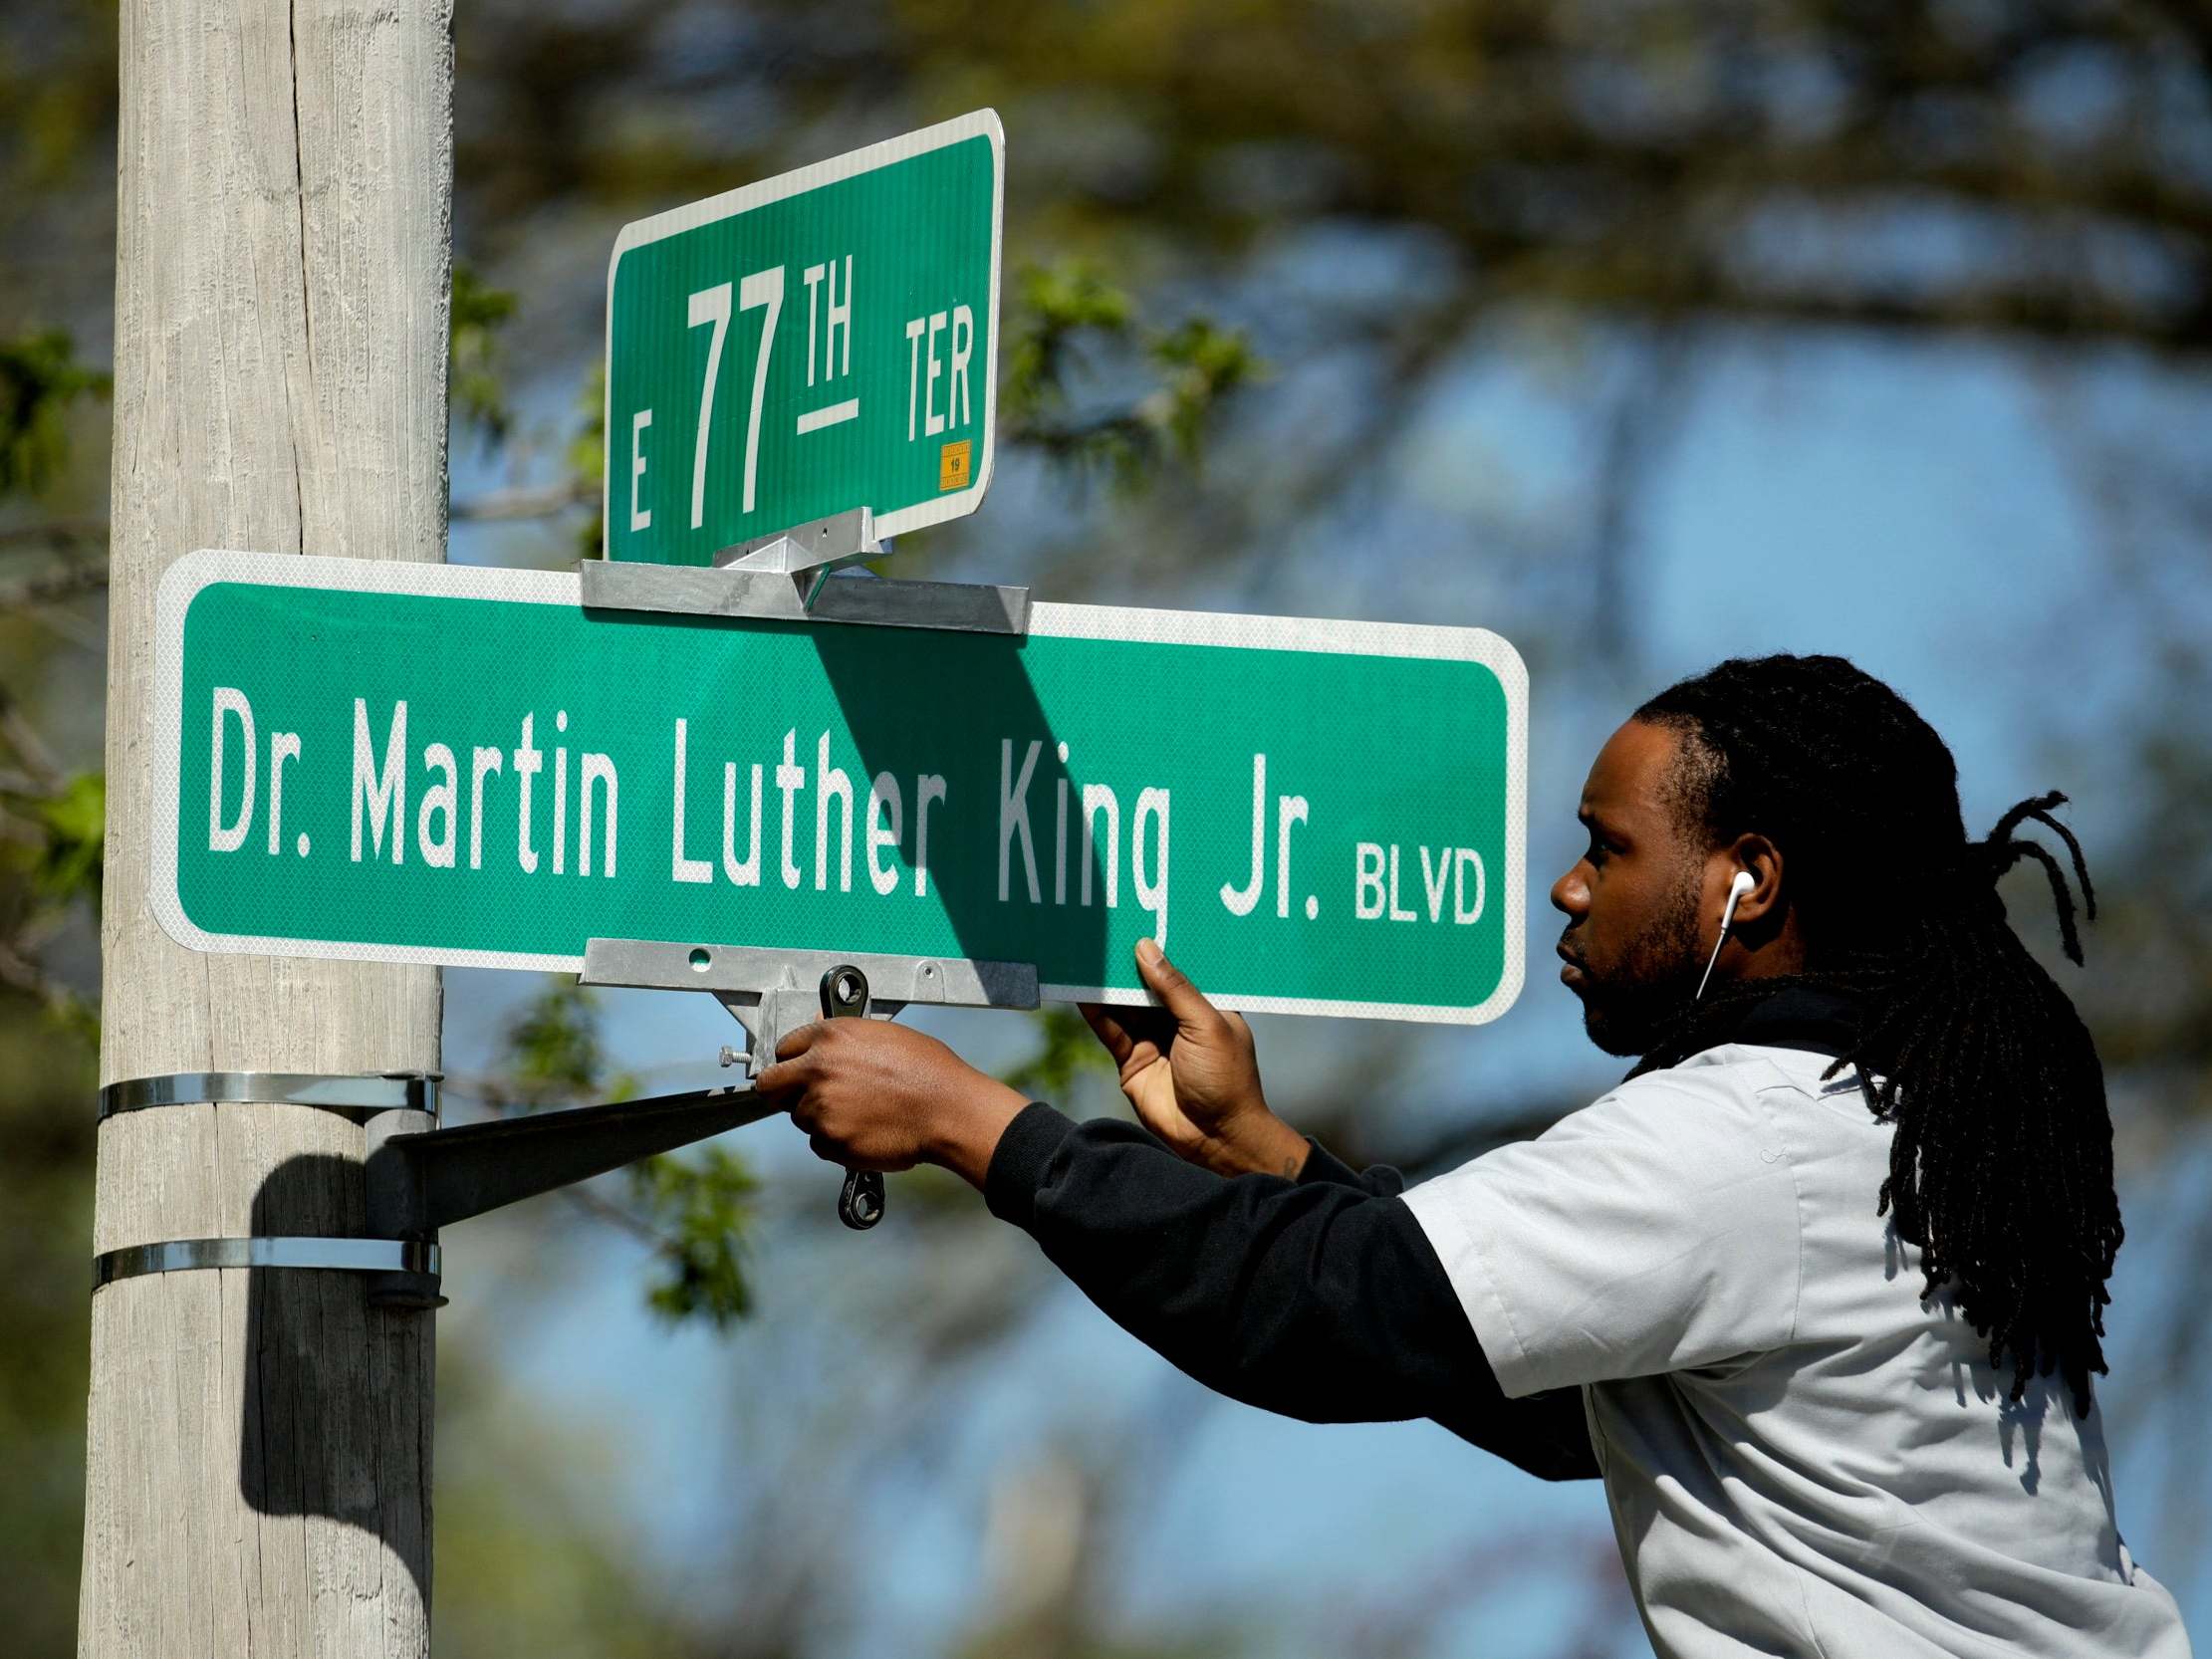 New road signs put up in Kansas City aftername change to honour Martin Luther Kingg